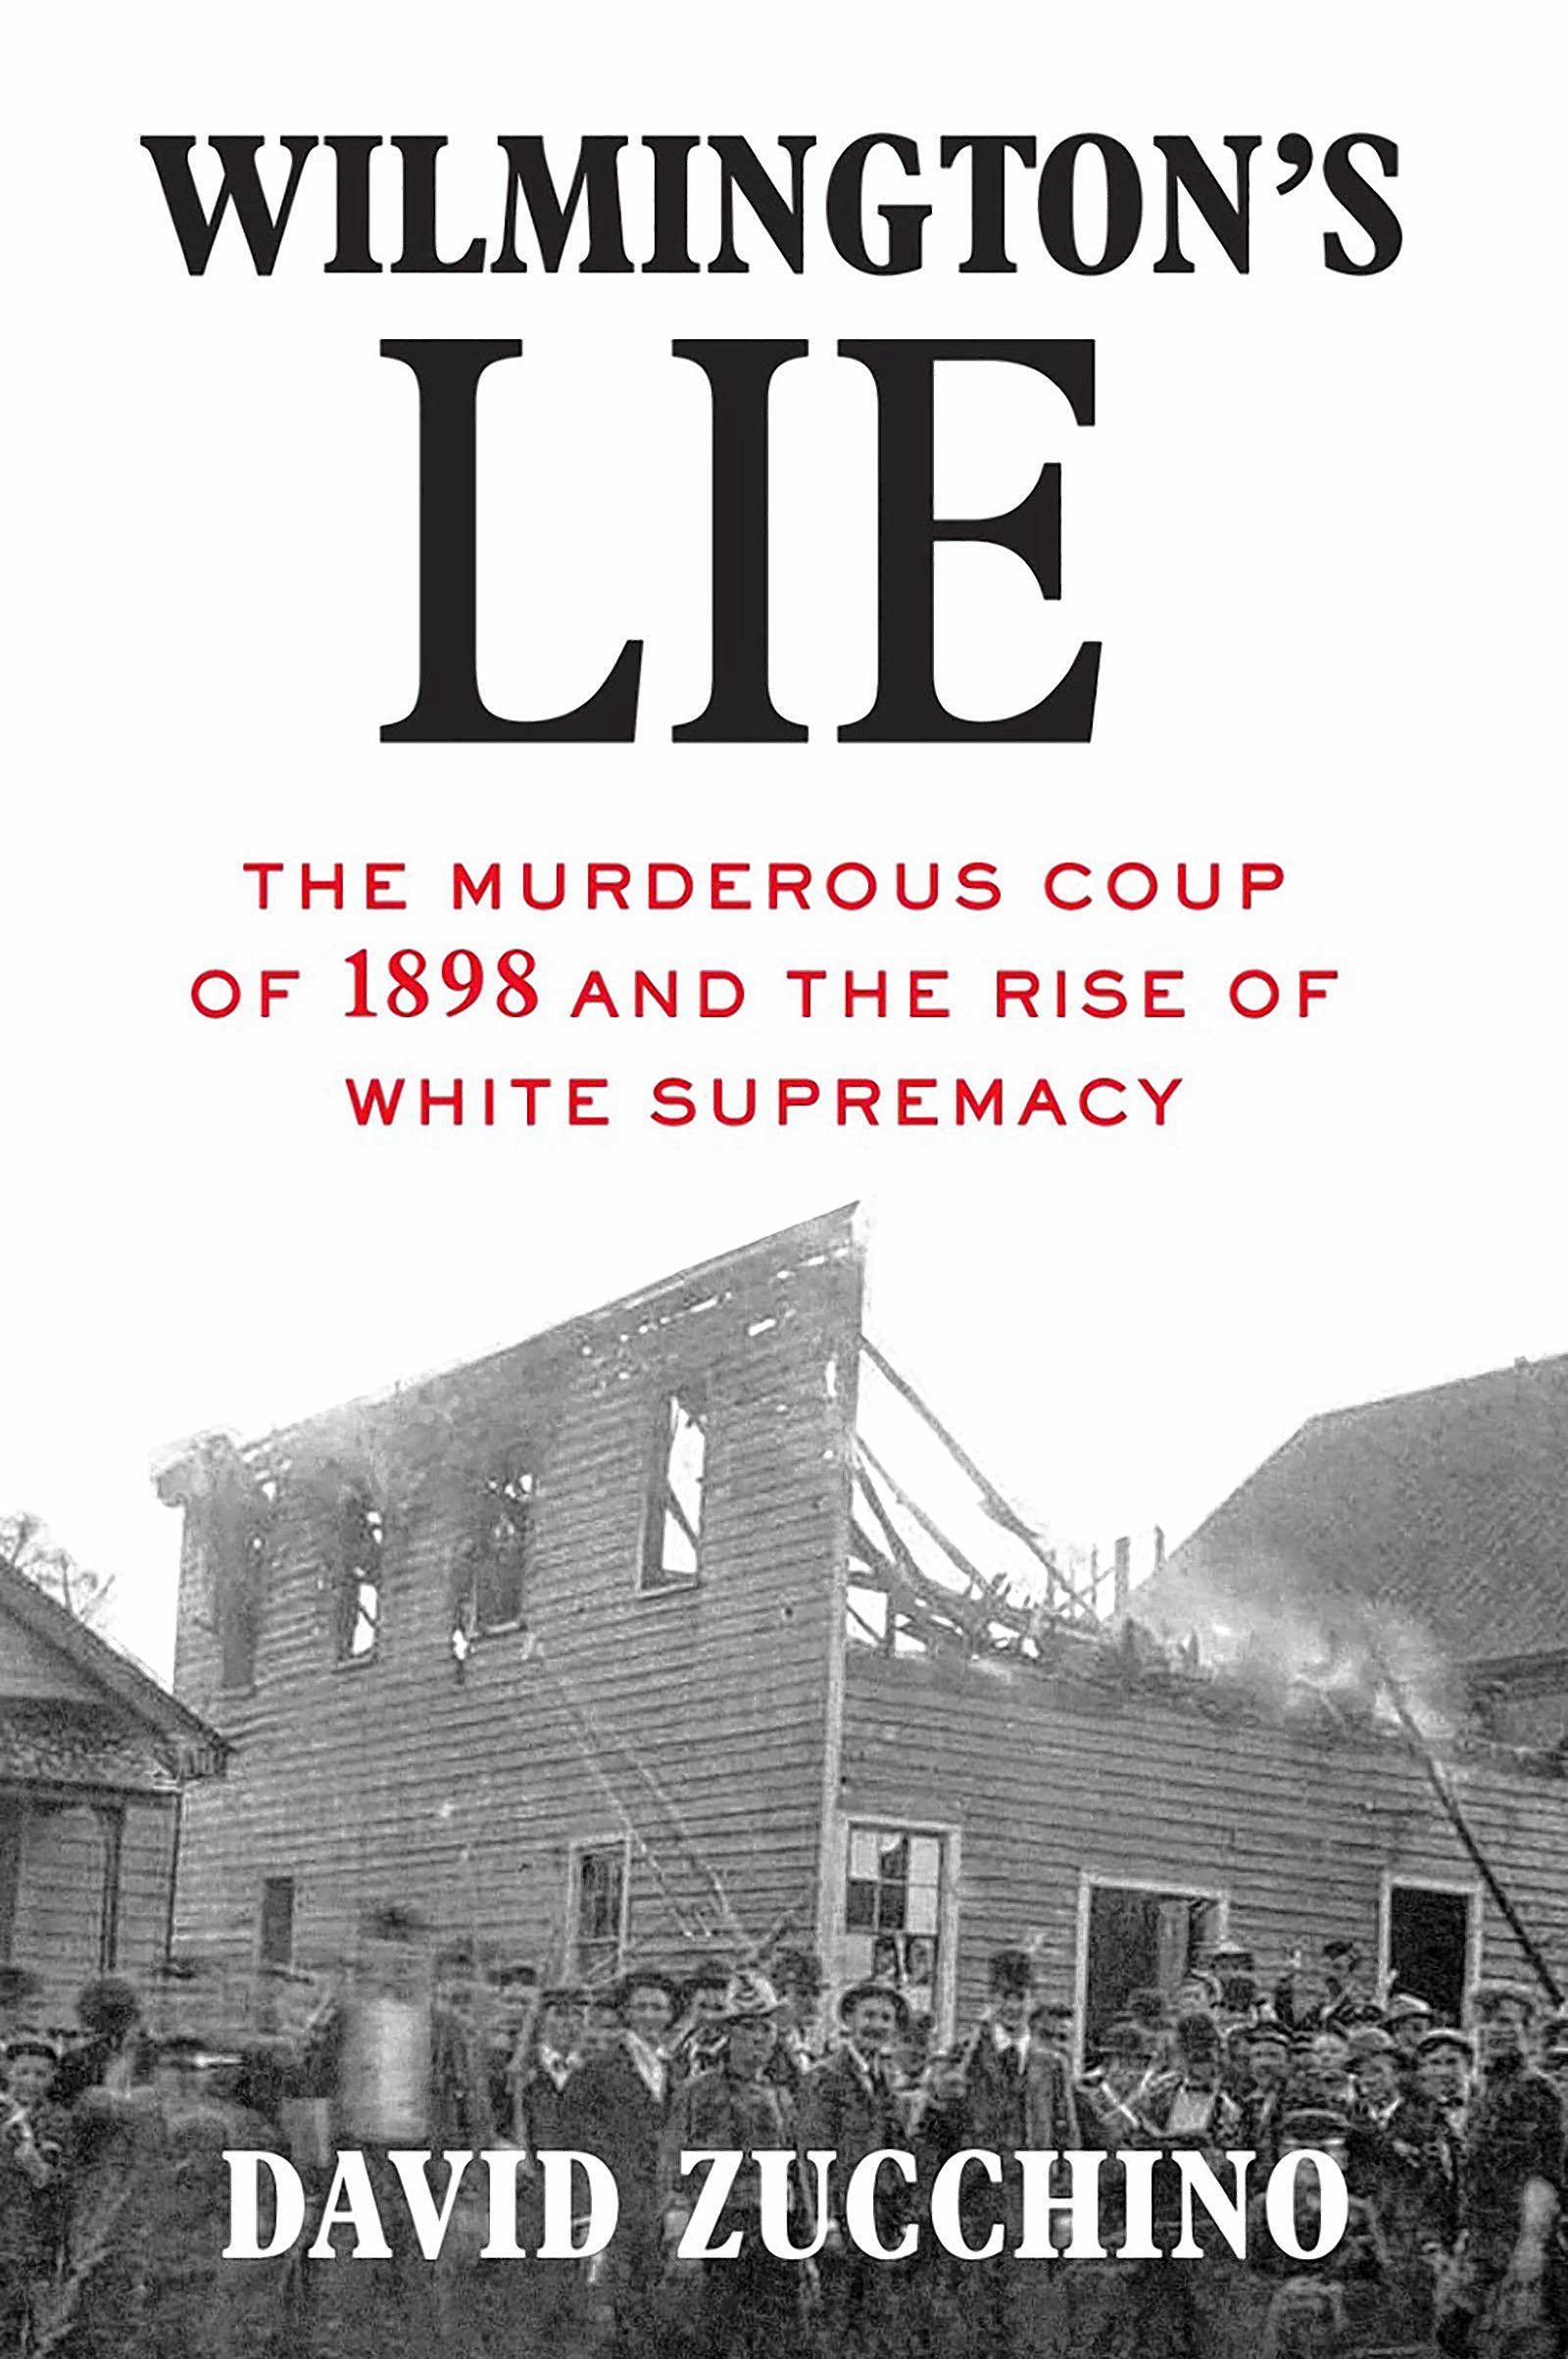 A horrifying chapter from U.S. history: “Wilmington’s Lie” details